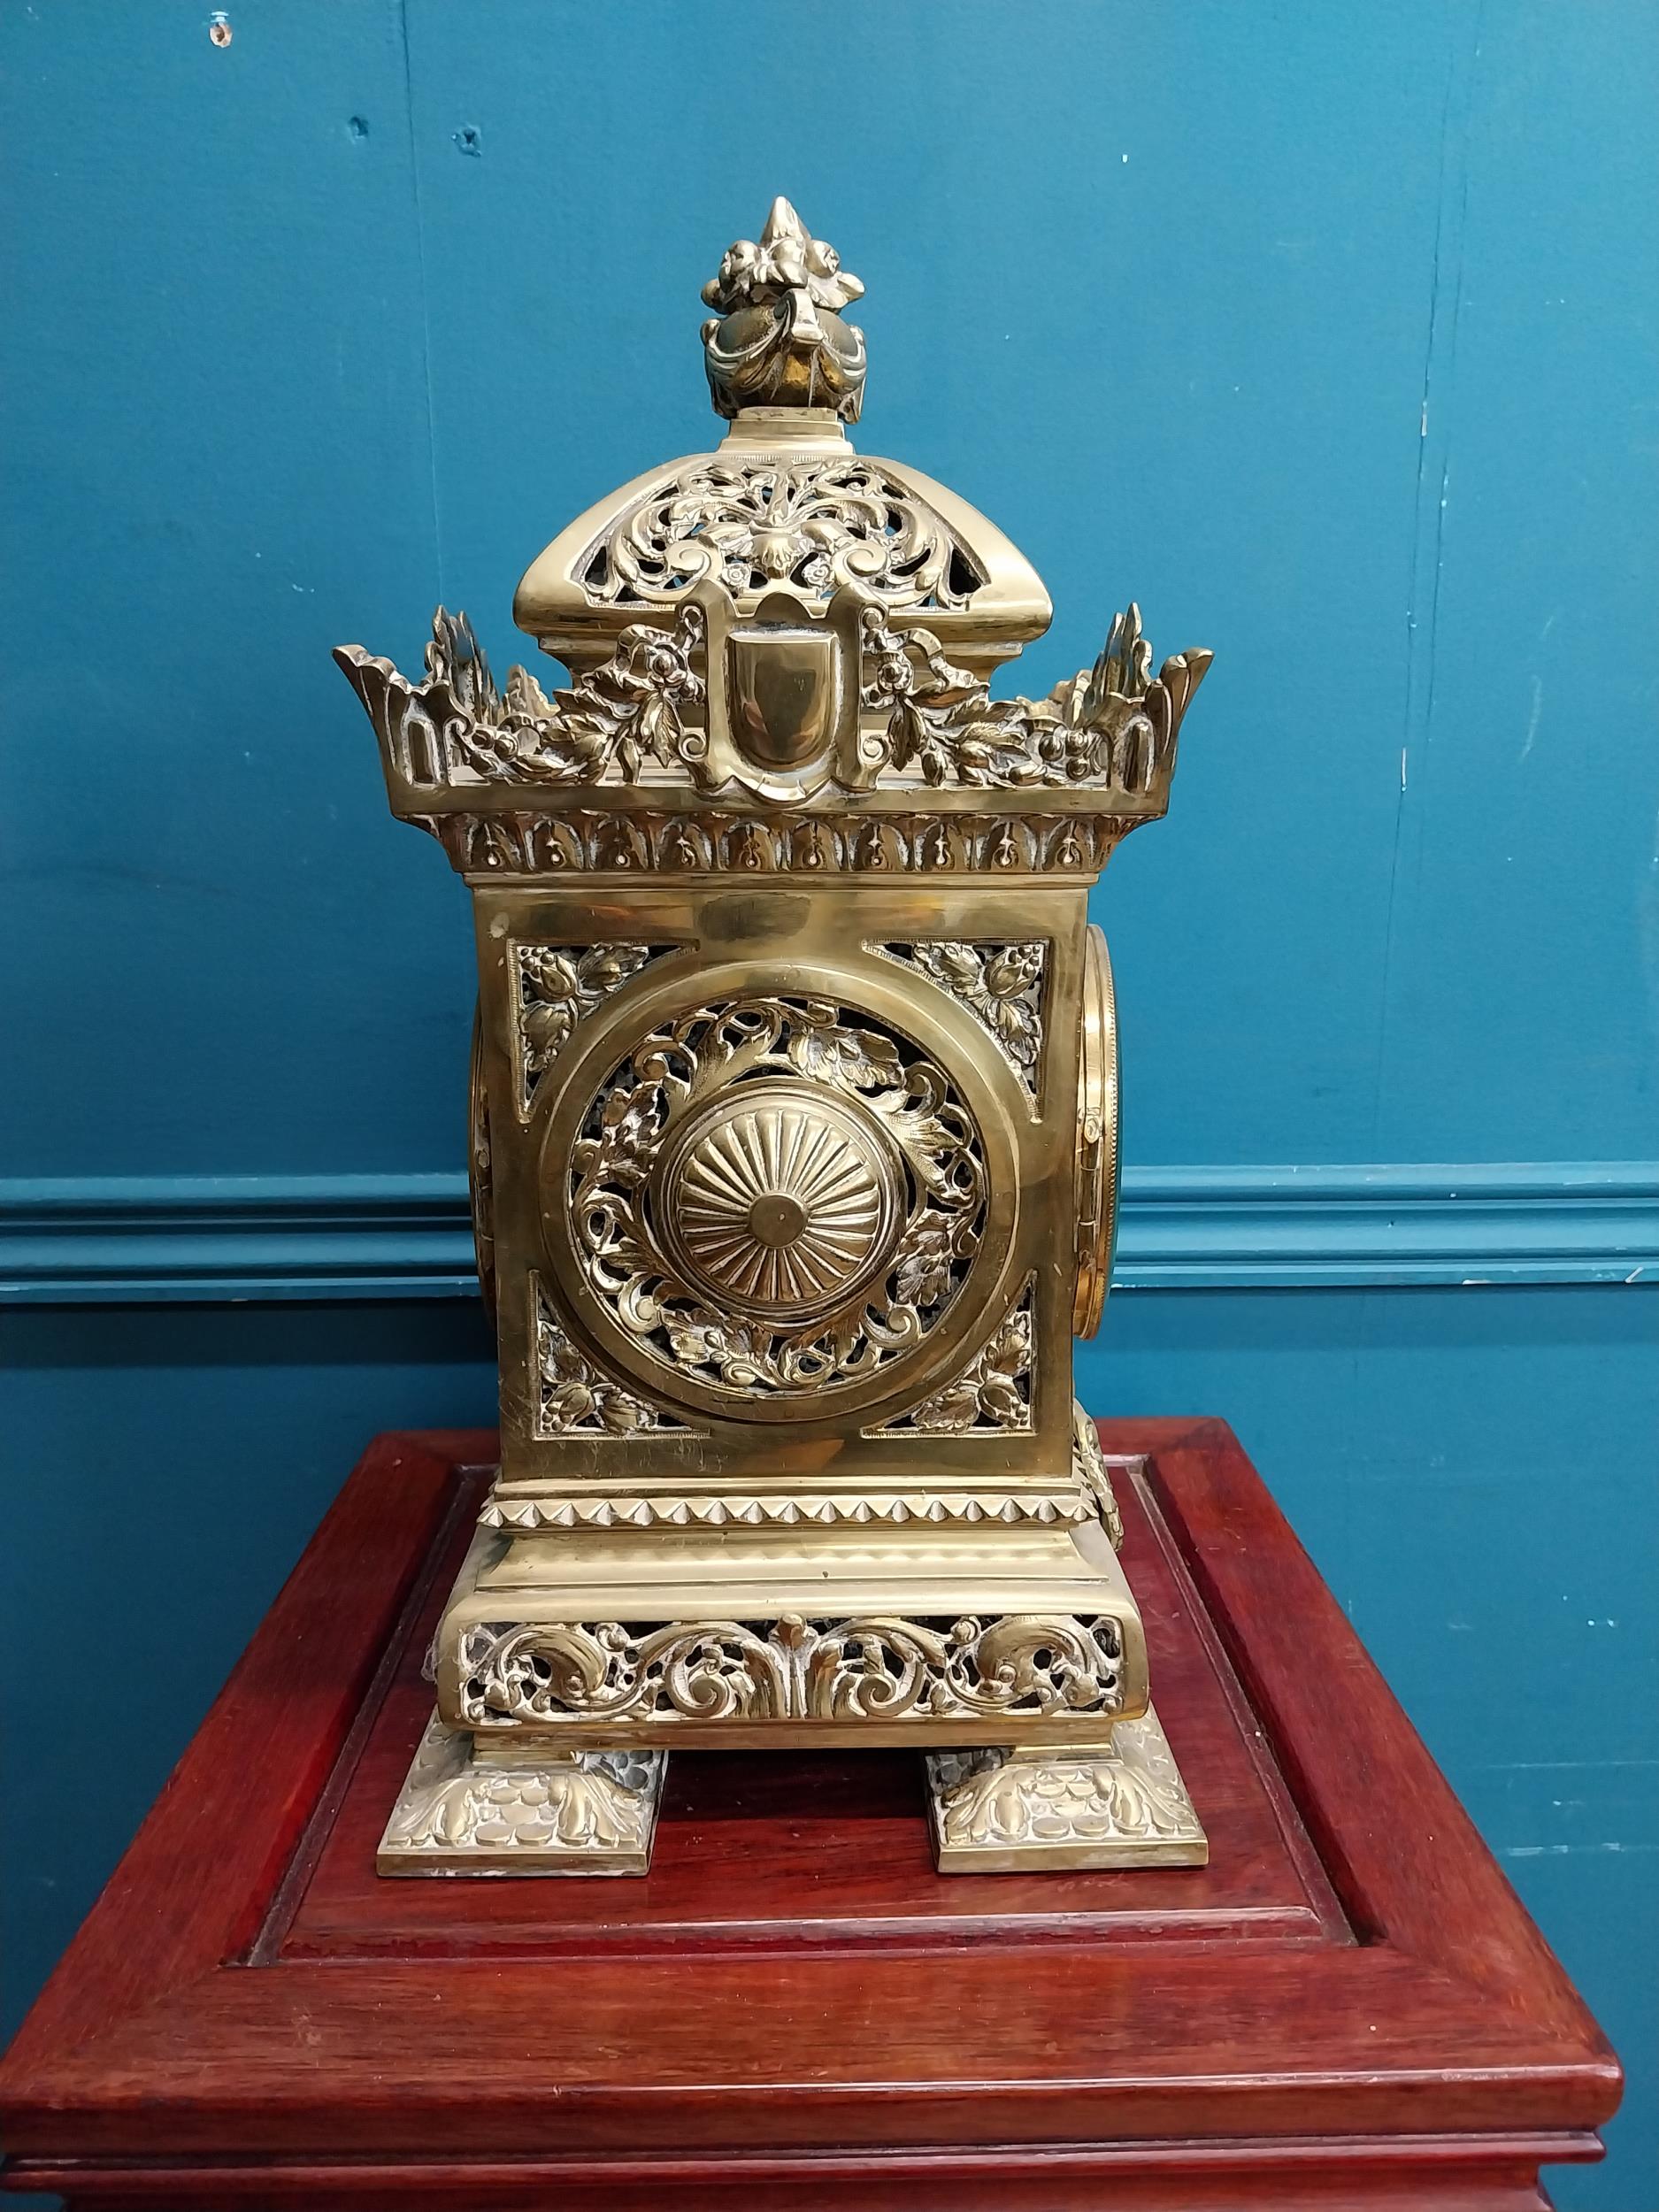 Decorative brass mantle clock in the Victorian style {39 cm H x 19 cm W x 19 cm D}. - Image 8 of 9